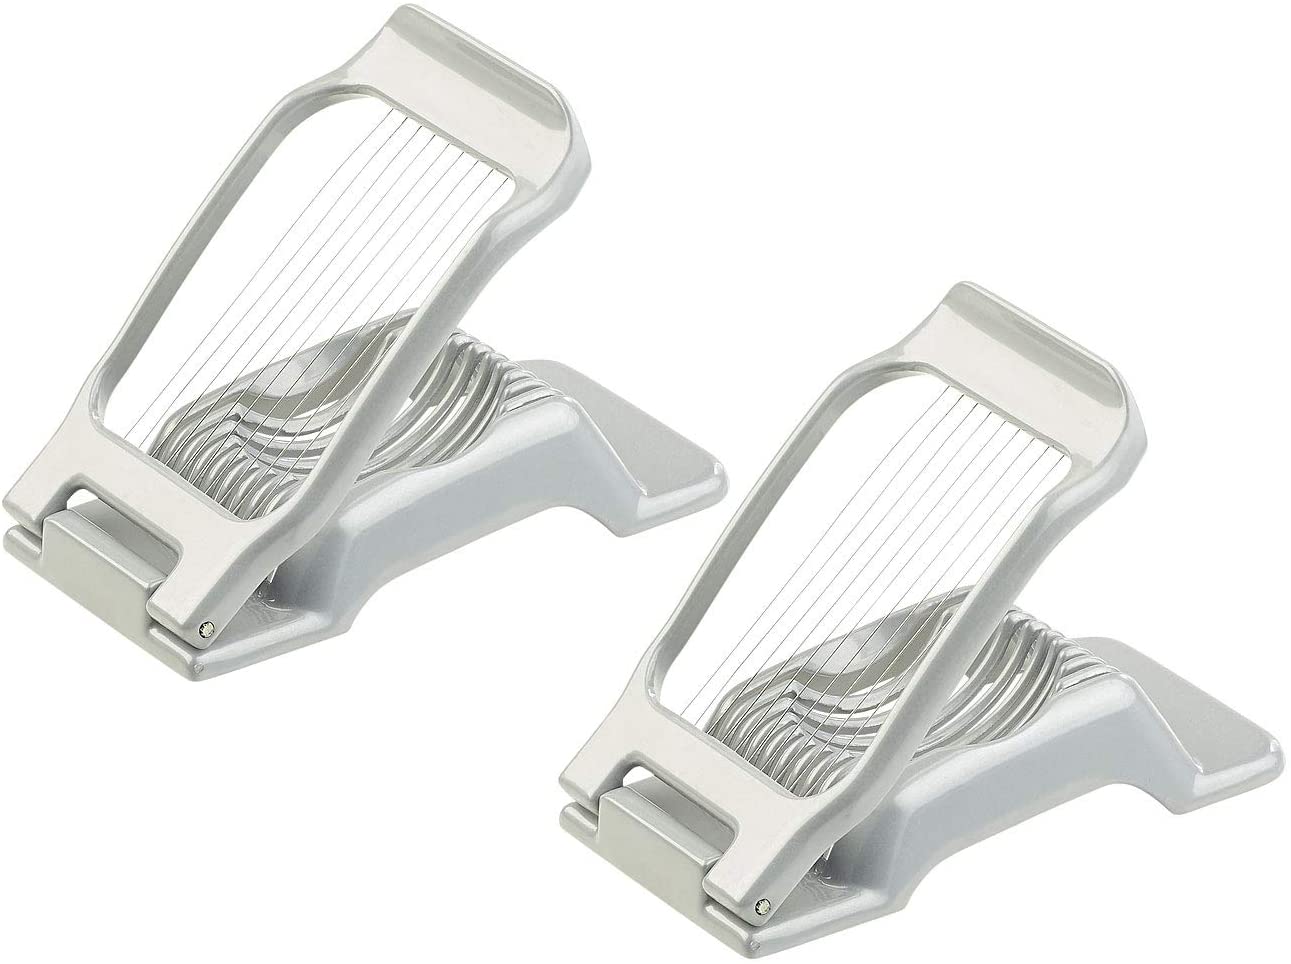 ROSENSTEIN & SOHNE Rosenstein & Söhne Folding egg cutter: set of 2 full metal egg cutters with 10 stainless steel wires (egg cutter made of metal)